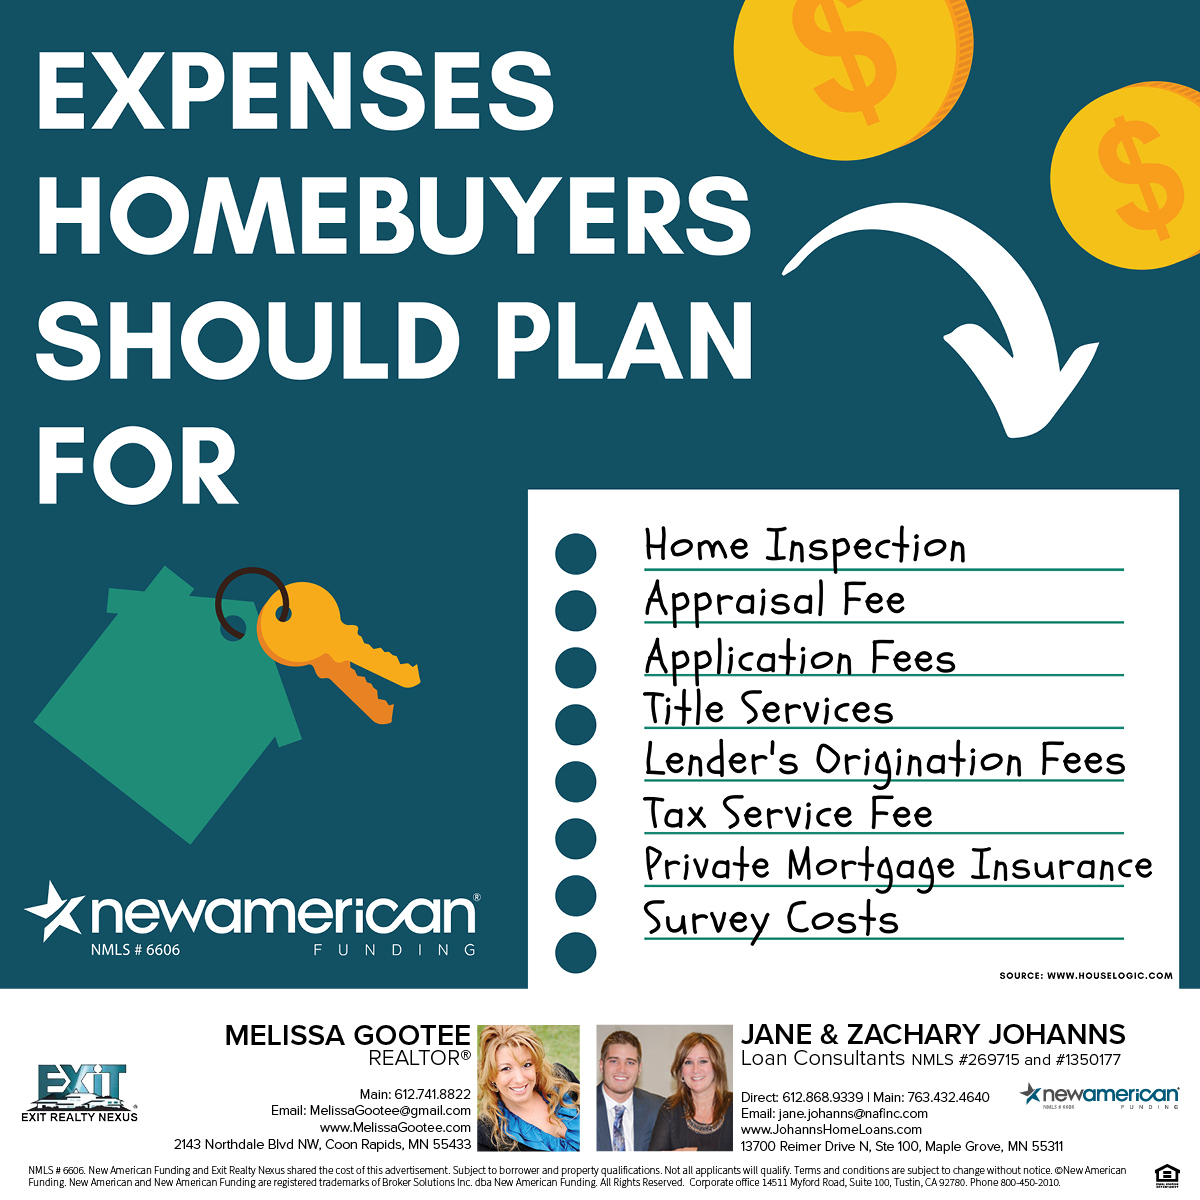 Expenses Homebuyers Should Plan For